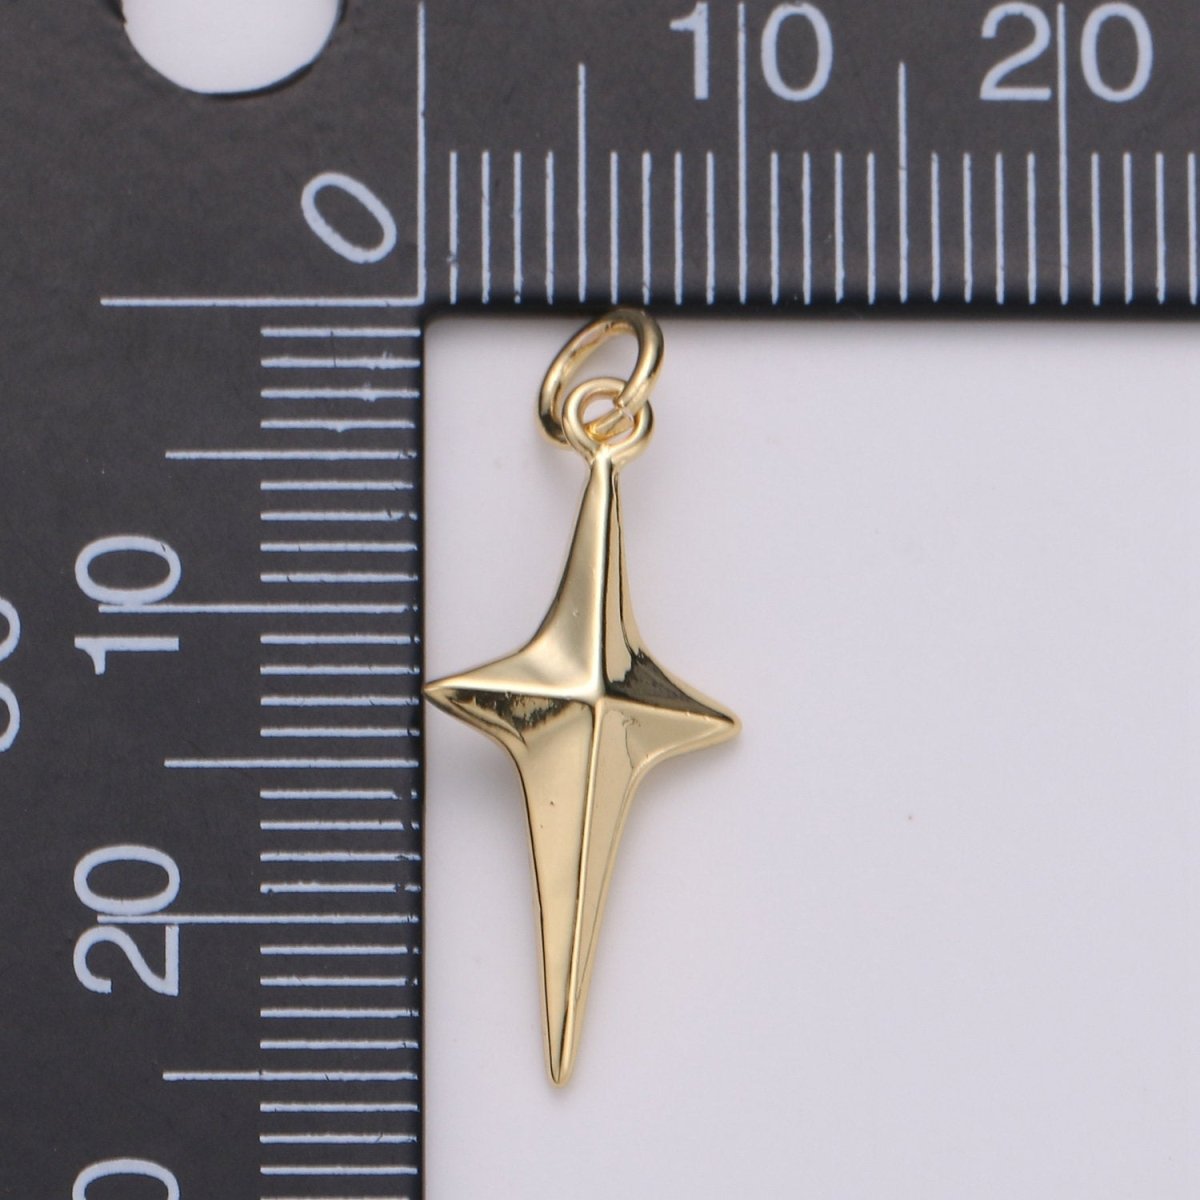 25x10mm 24k Gold Filled North Star Charms, Gold Star Pendant, Celestial Jewelry Minimalist Jewelry Making supply D-354 - DLUXCA